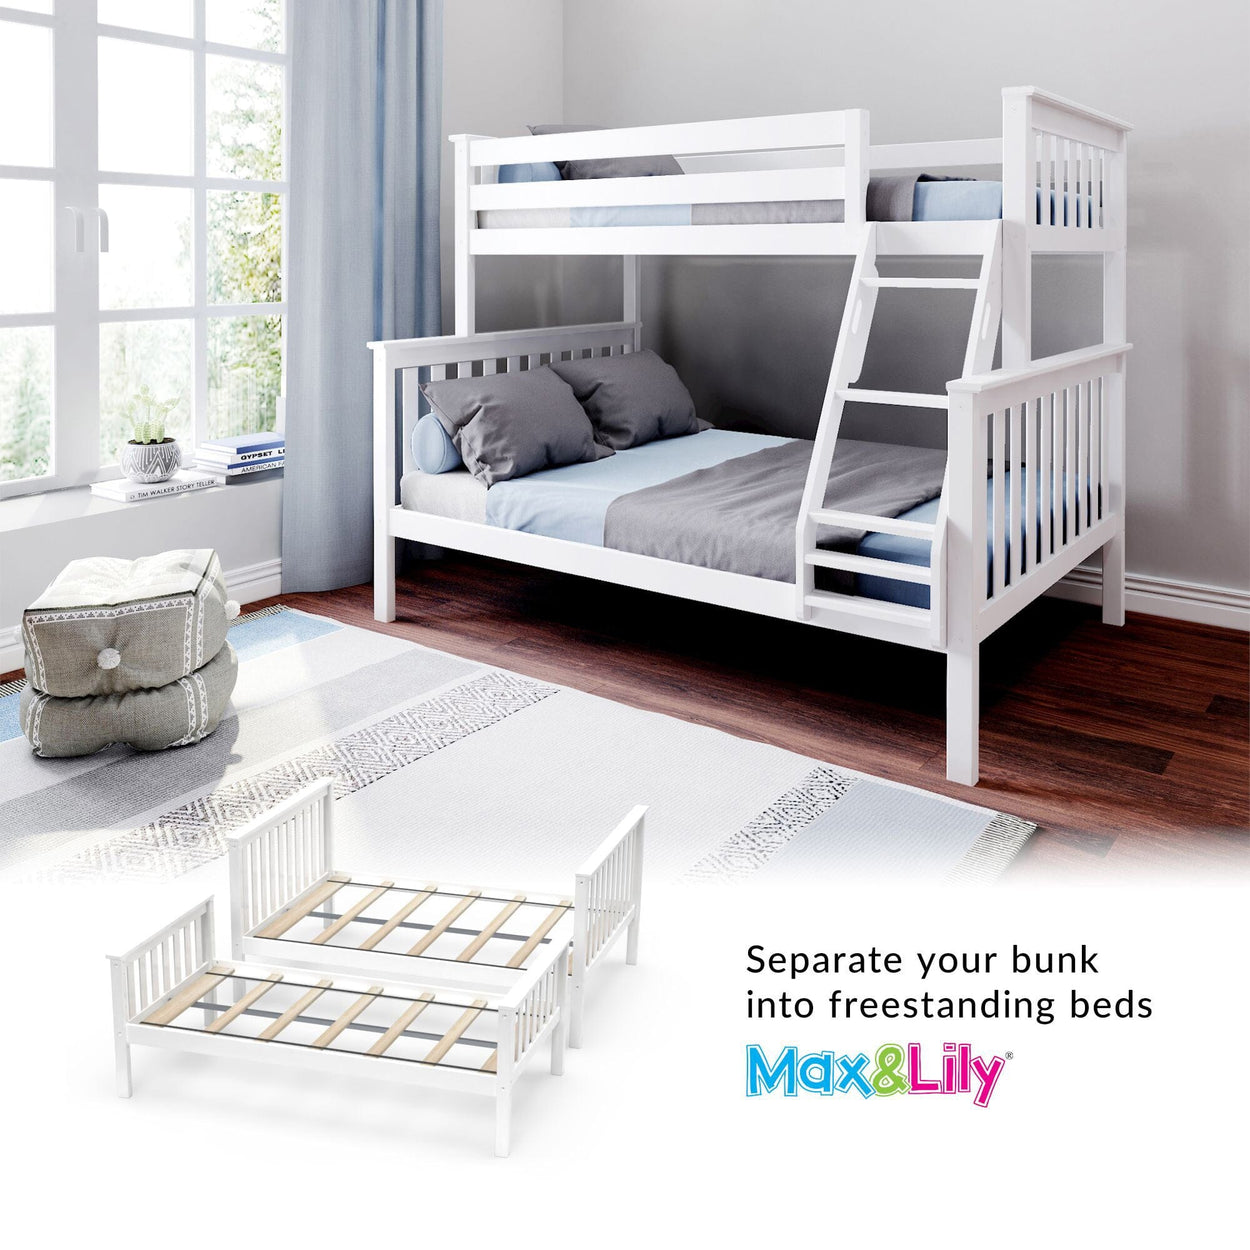 180231-002 : Bunk Beds Classic Twin over Full Bunk Bed, White